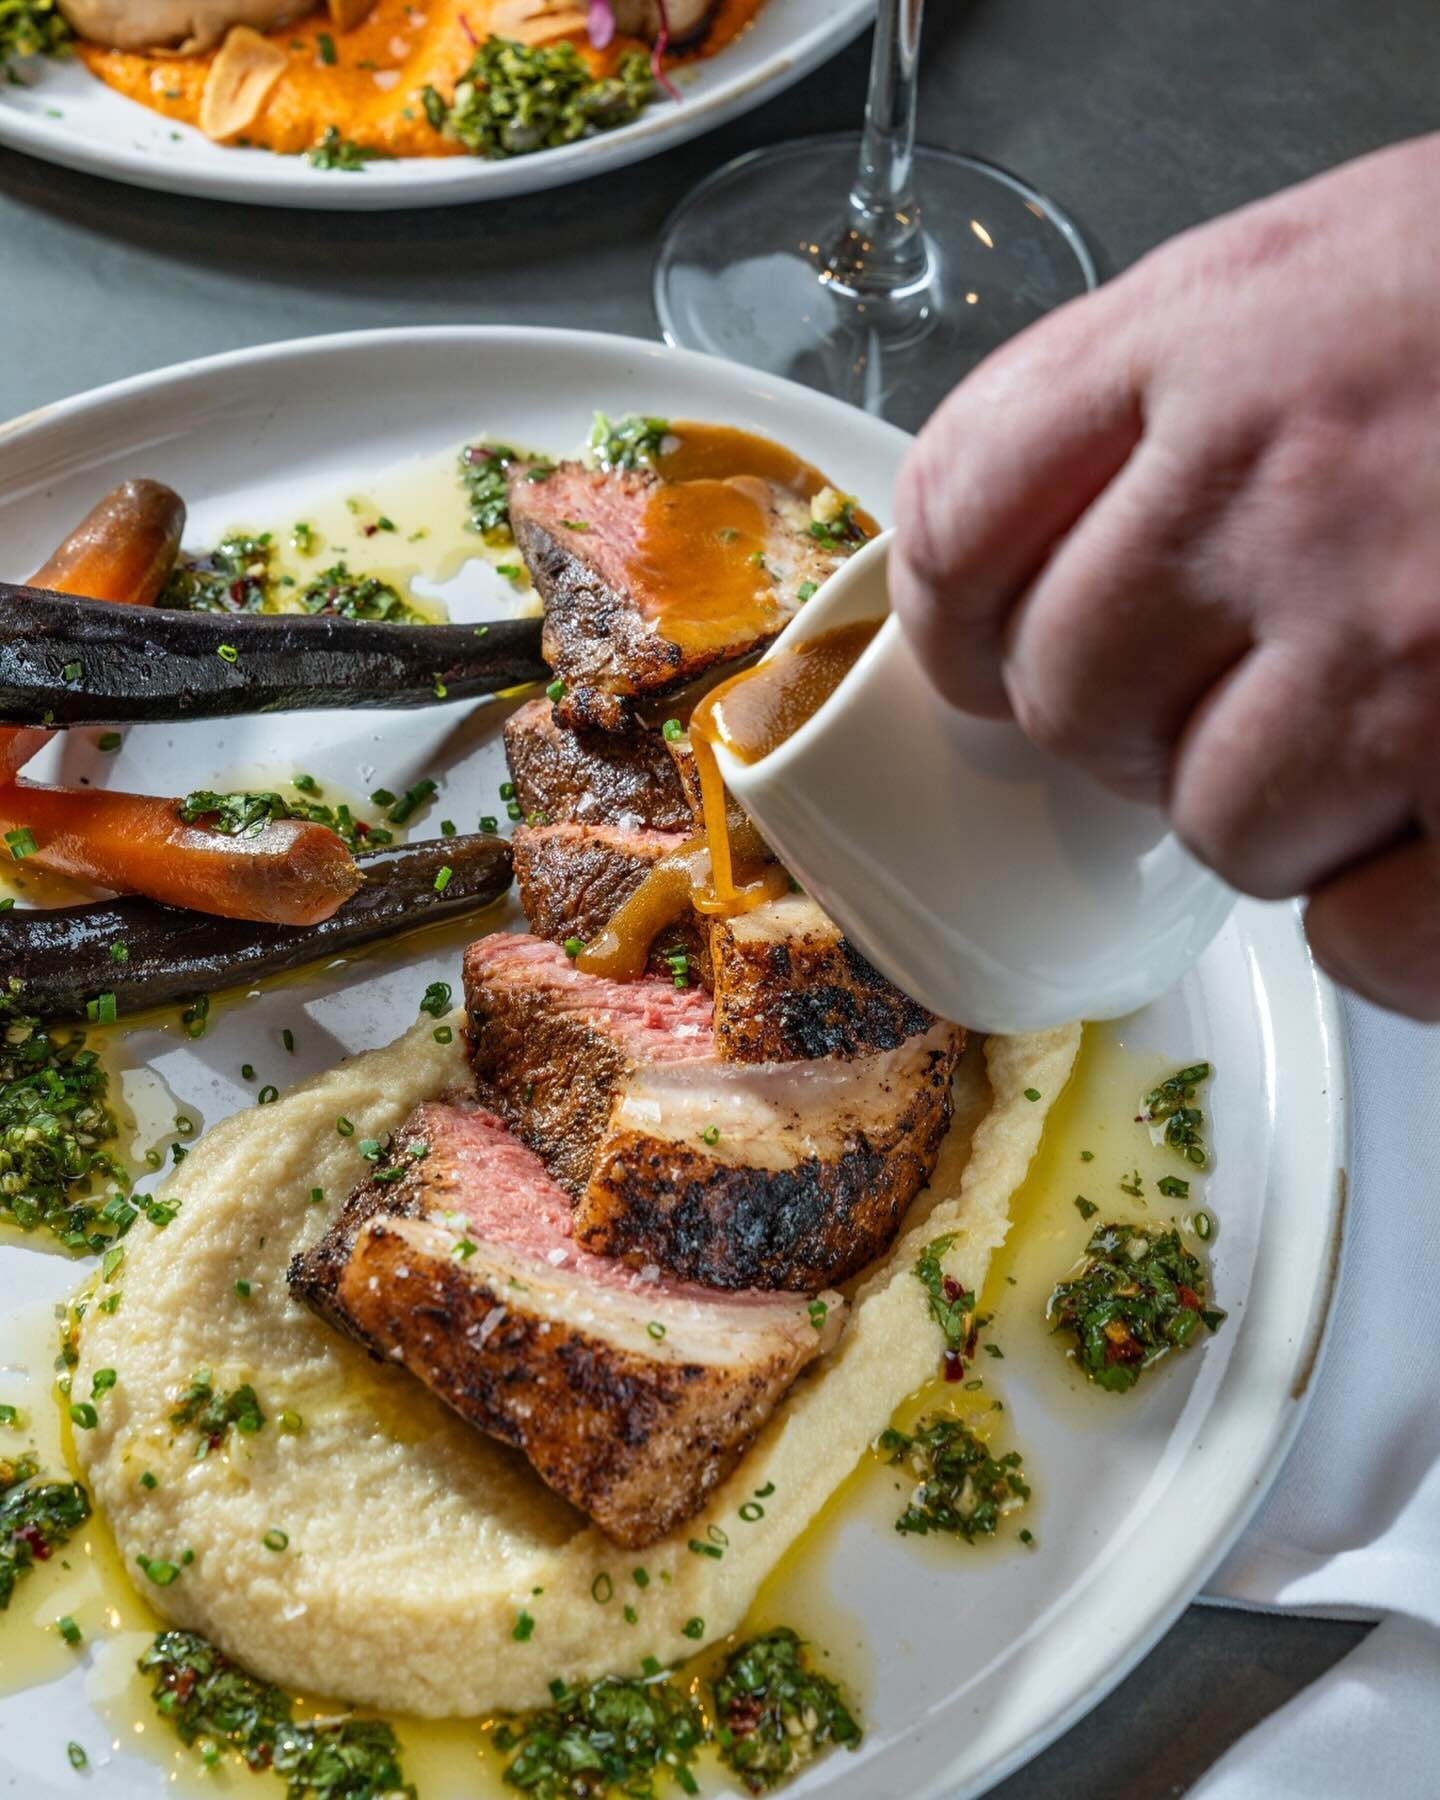 The cure for the rainy day blues: Coulotte Steak from @rosedabeef with tallow poached carrots, parsnip pur&egrave;e and chimichurri.